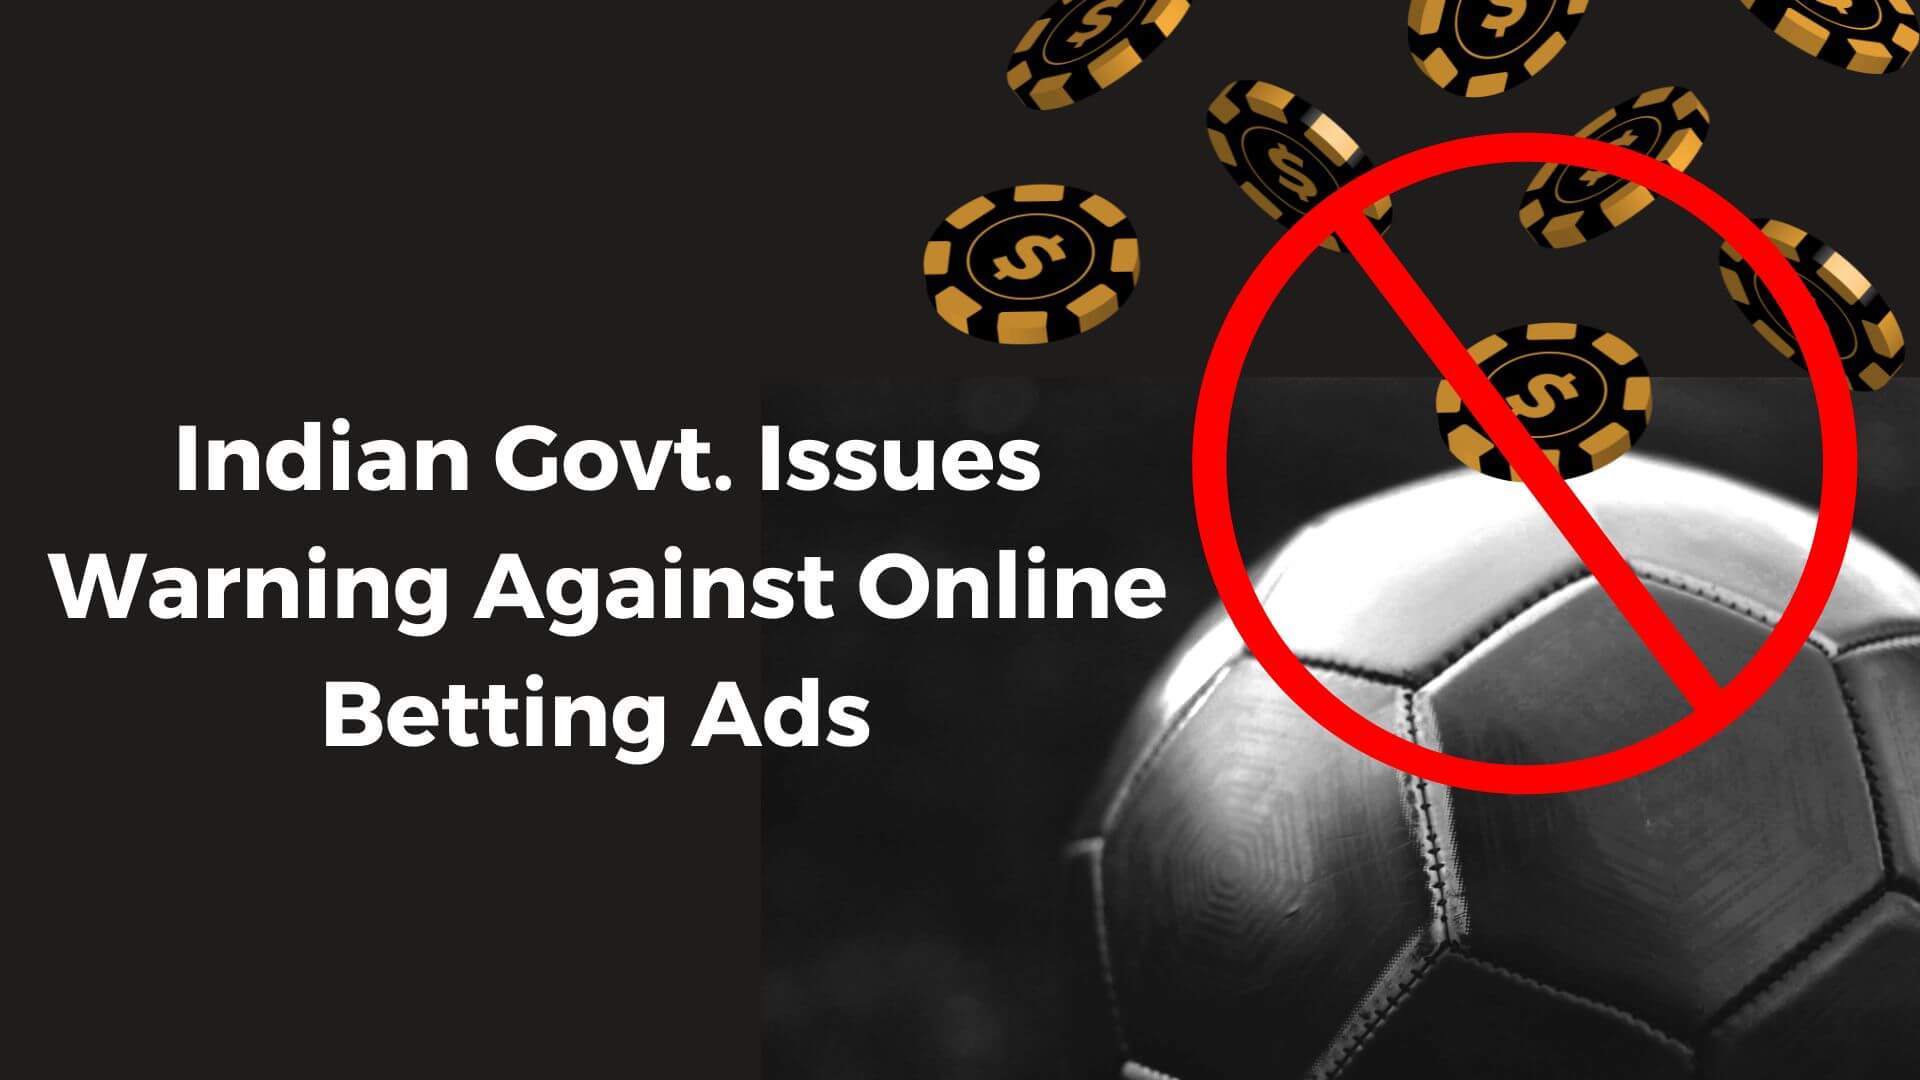 Govt. Issues Warning to TV Channels, Digital Publishers Against Betting Ads